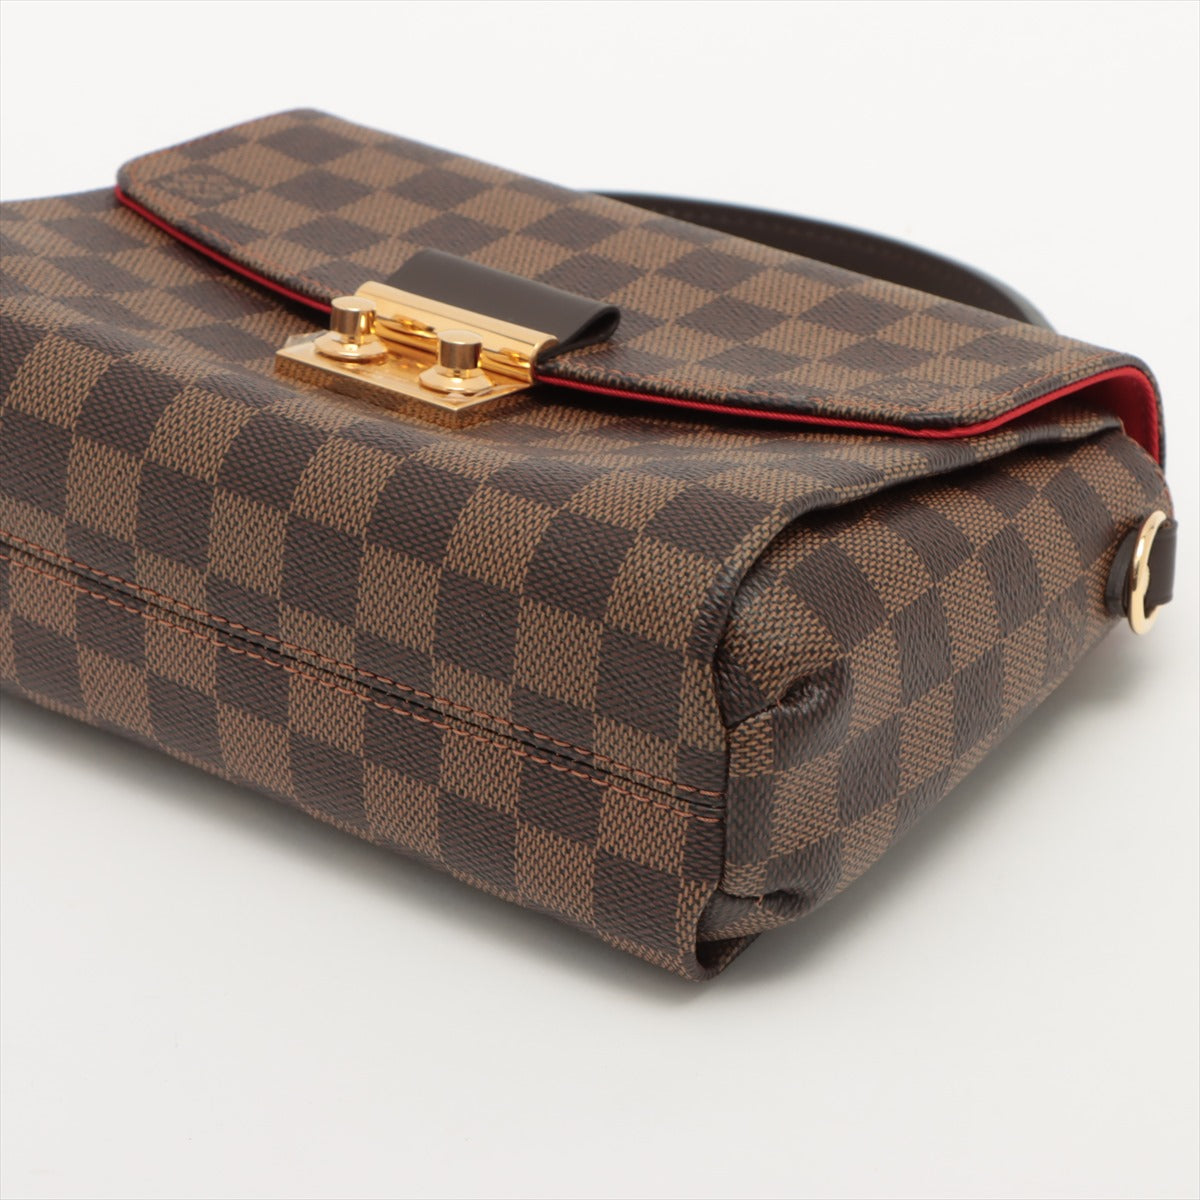 Vuitton Croisette Germany, SAVE 53% 